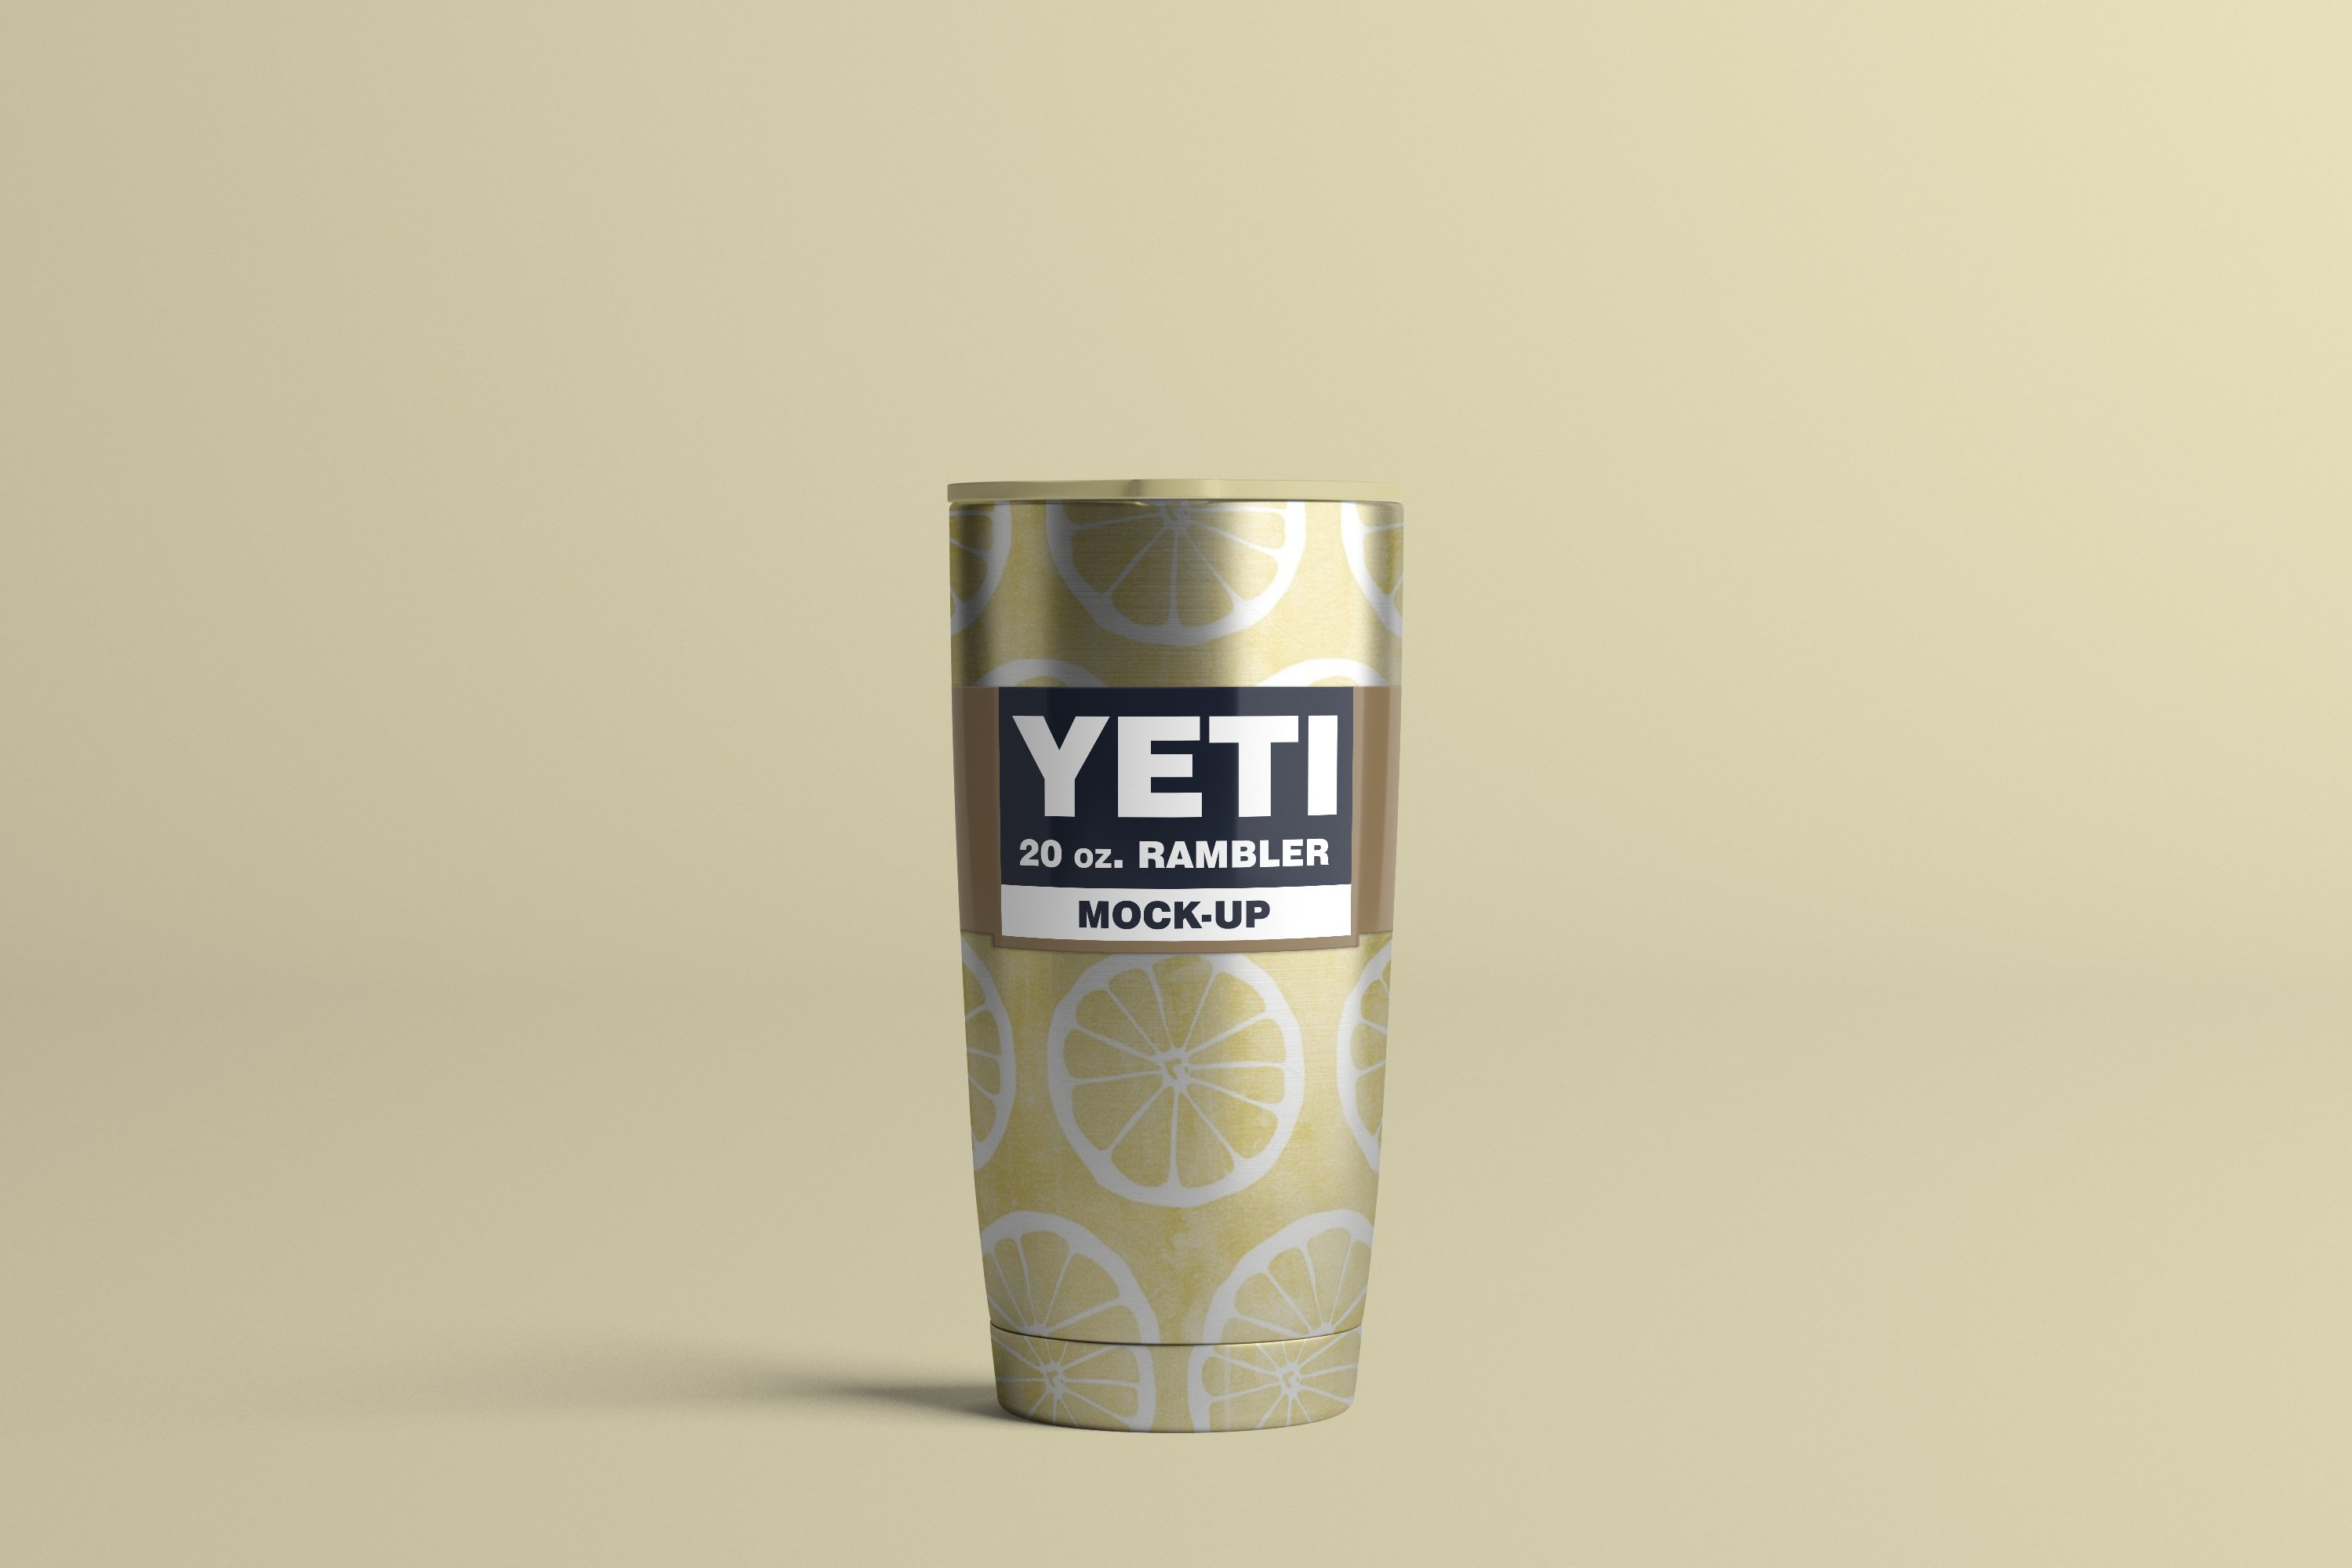 Classic gold yeti cup with lemon prints.